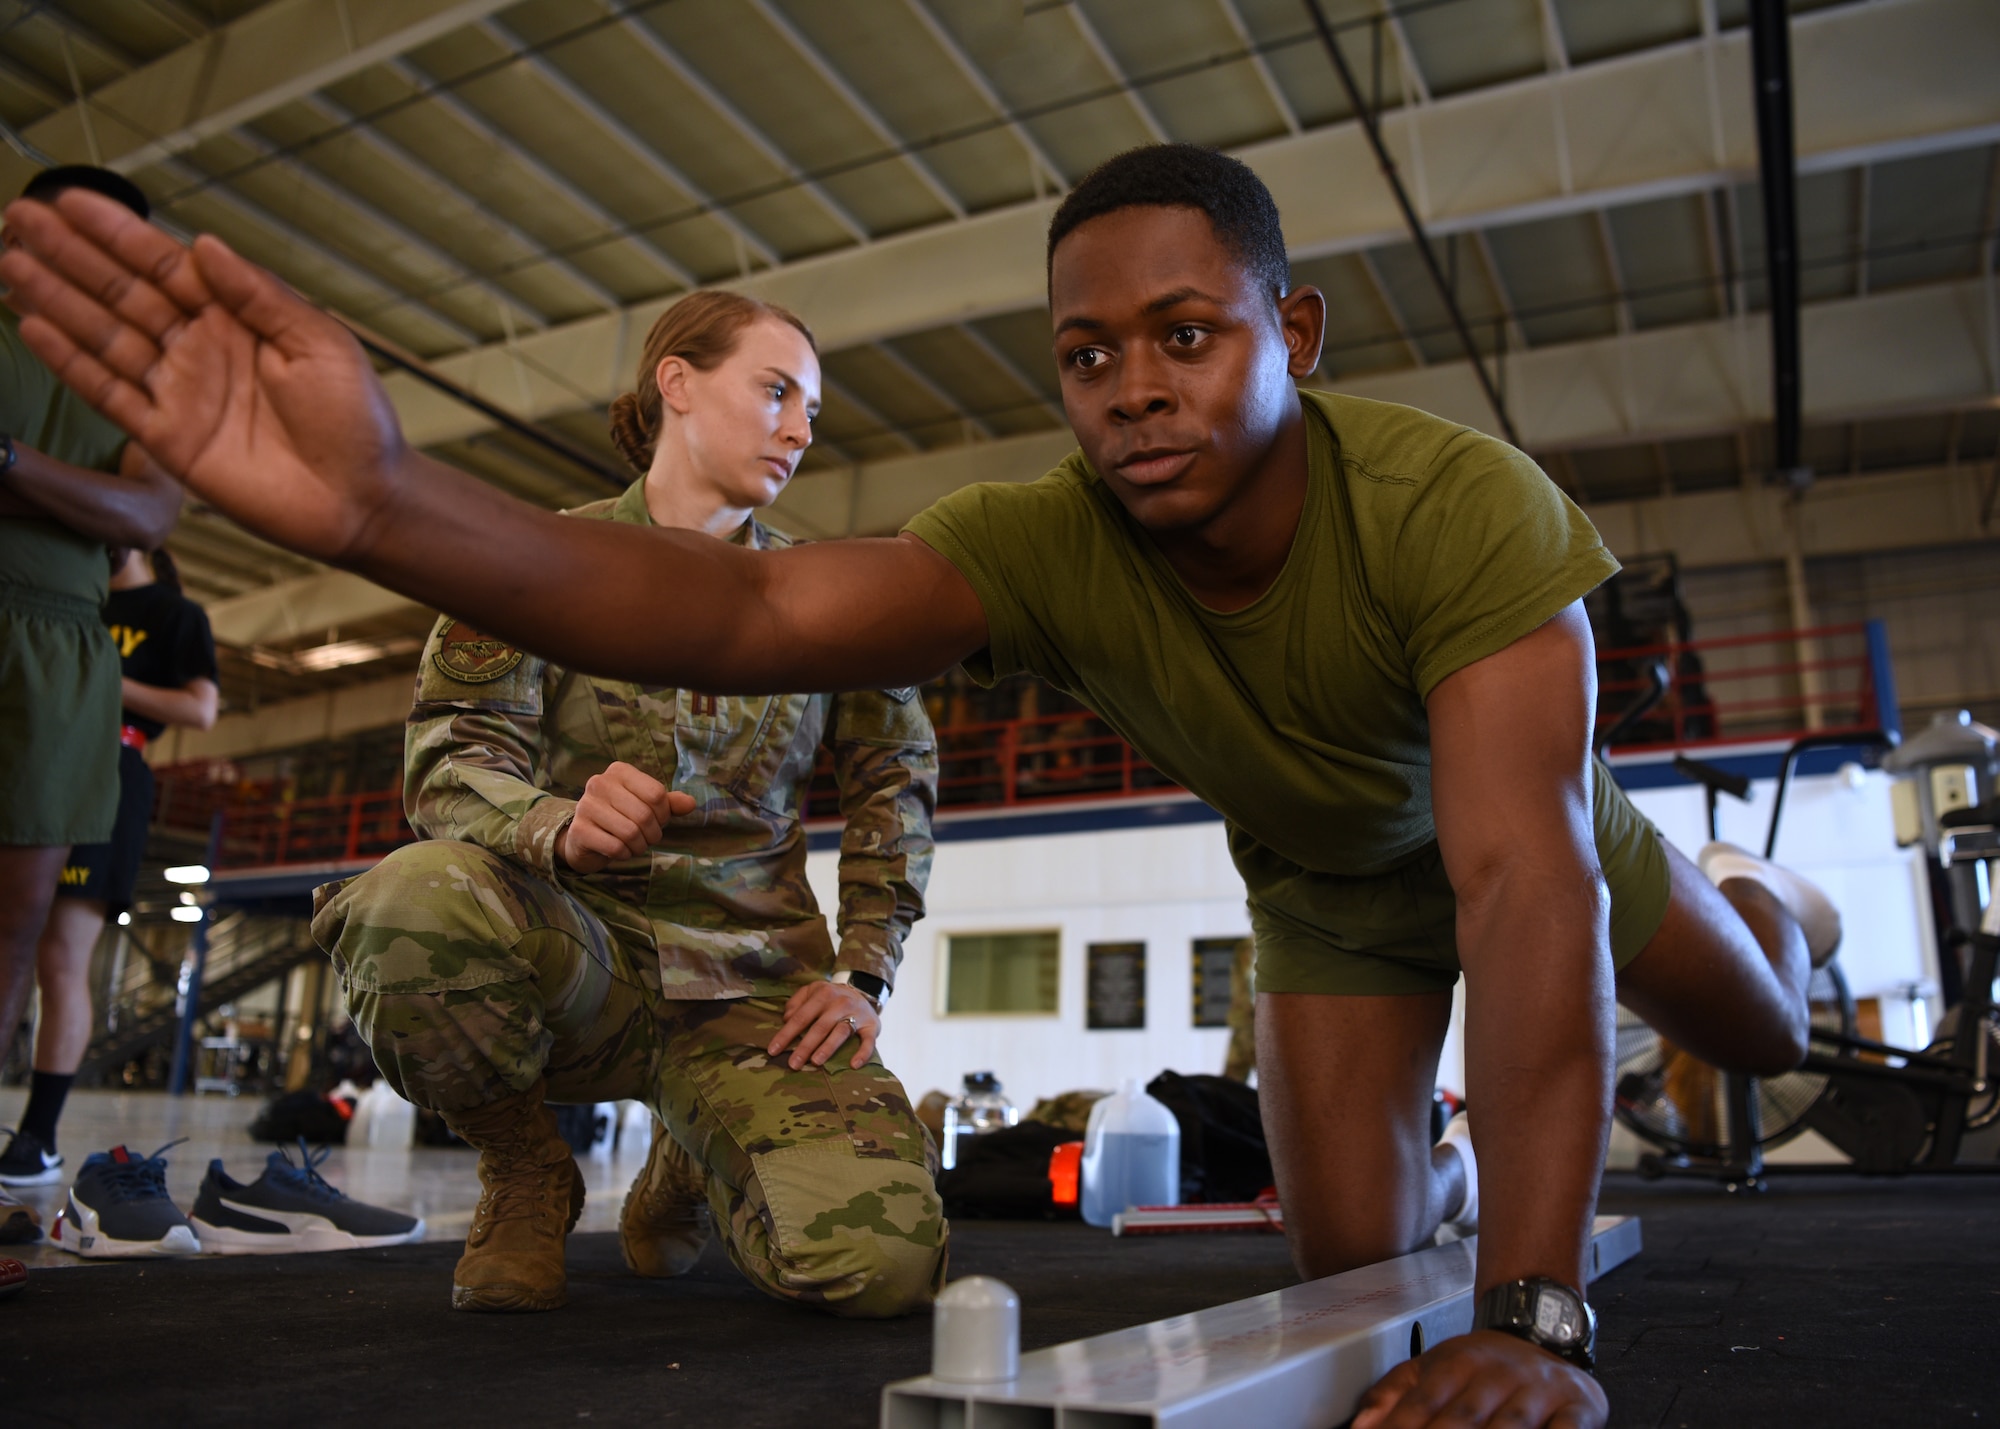 U.S. Air Force Capt. Danielle Langness, 17th Medical Group physical therapist, assesses a student's functional movements on Goodfellow Air Force Base, Texas, June 30, 2021. Students of the 312th Training Squadron were evaluated in physical and mental aspects before starting their technical training at the Louis F. Garland Department of Defense Fire Academy. (U.S. Air Force photo by Senior Airman Abbey Rieves)